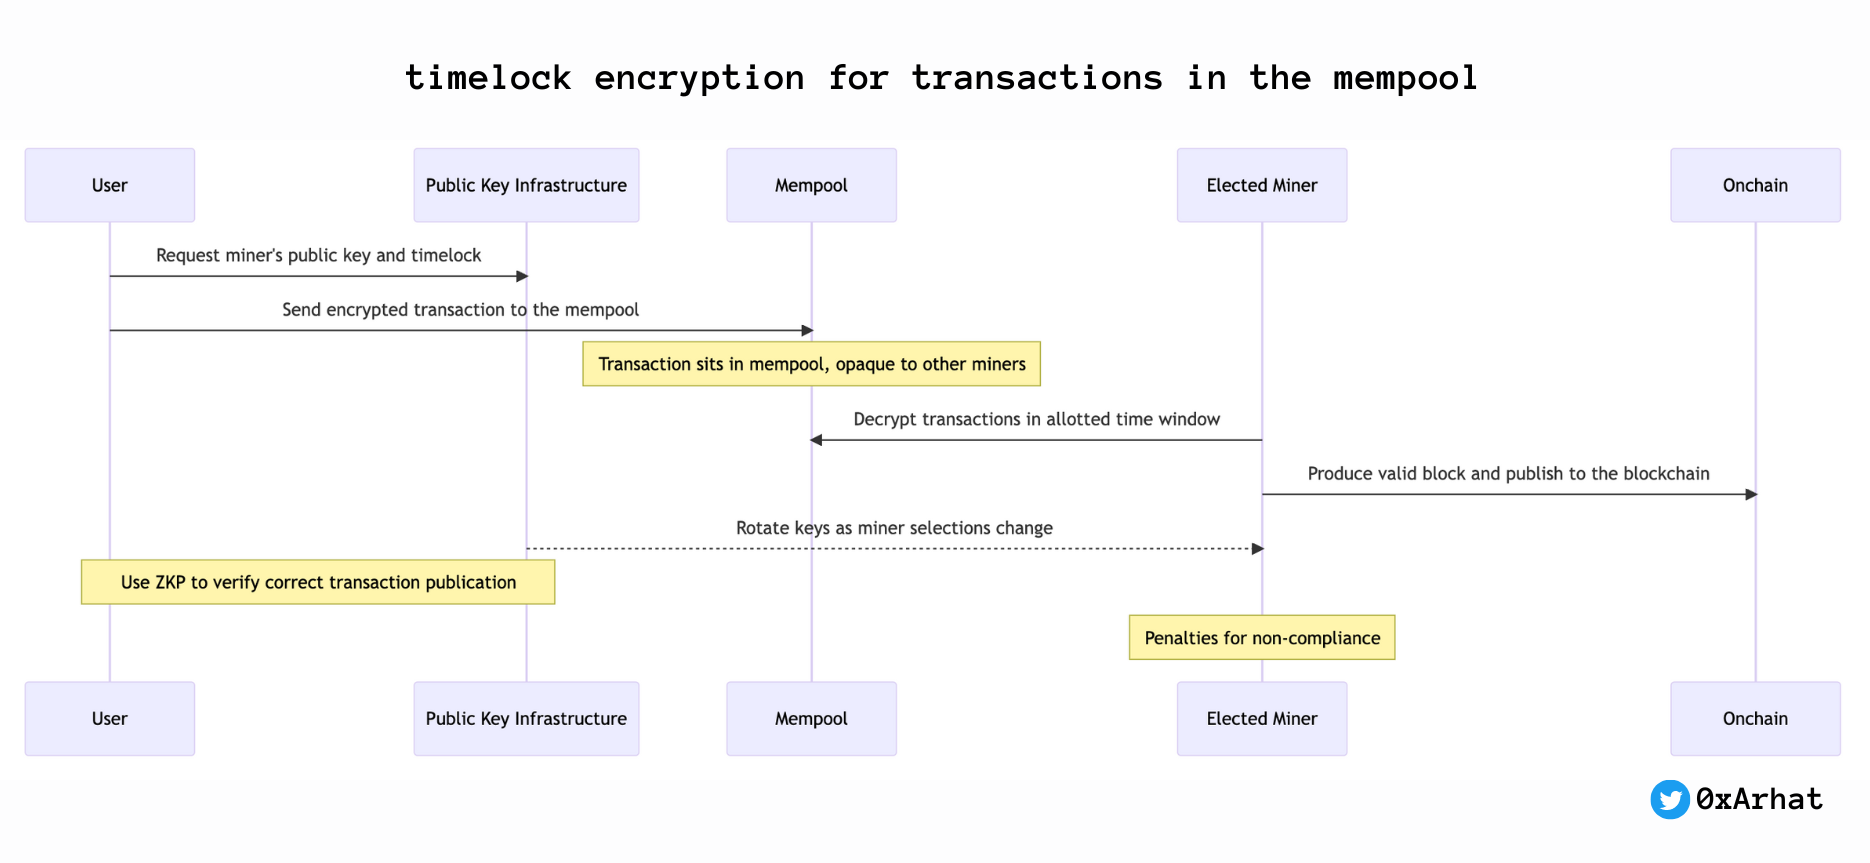 This encryption can only be decrypted by the specific miner who is elected to produce the next block.